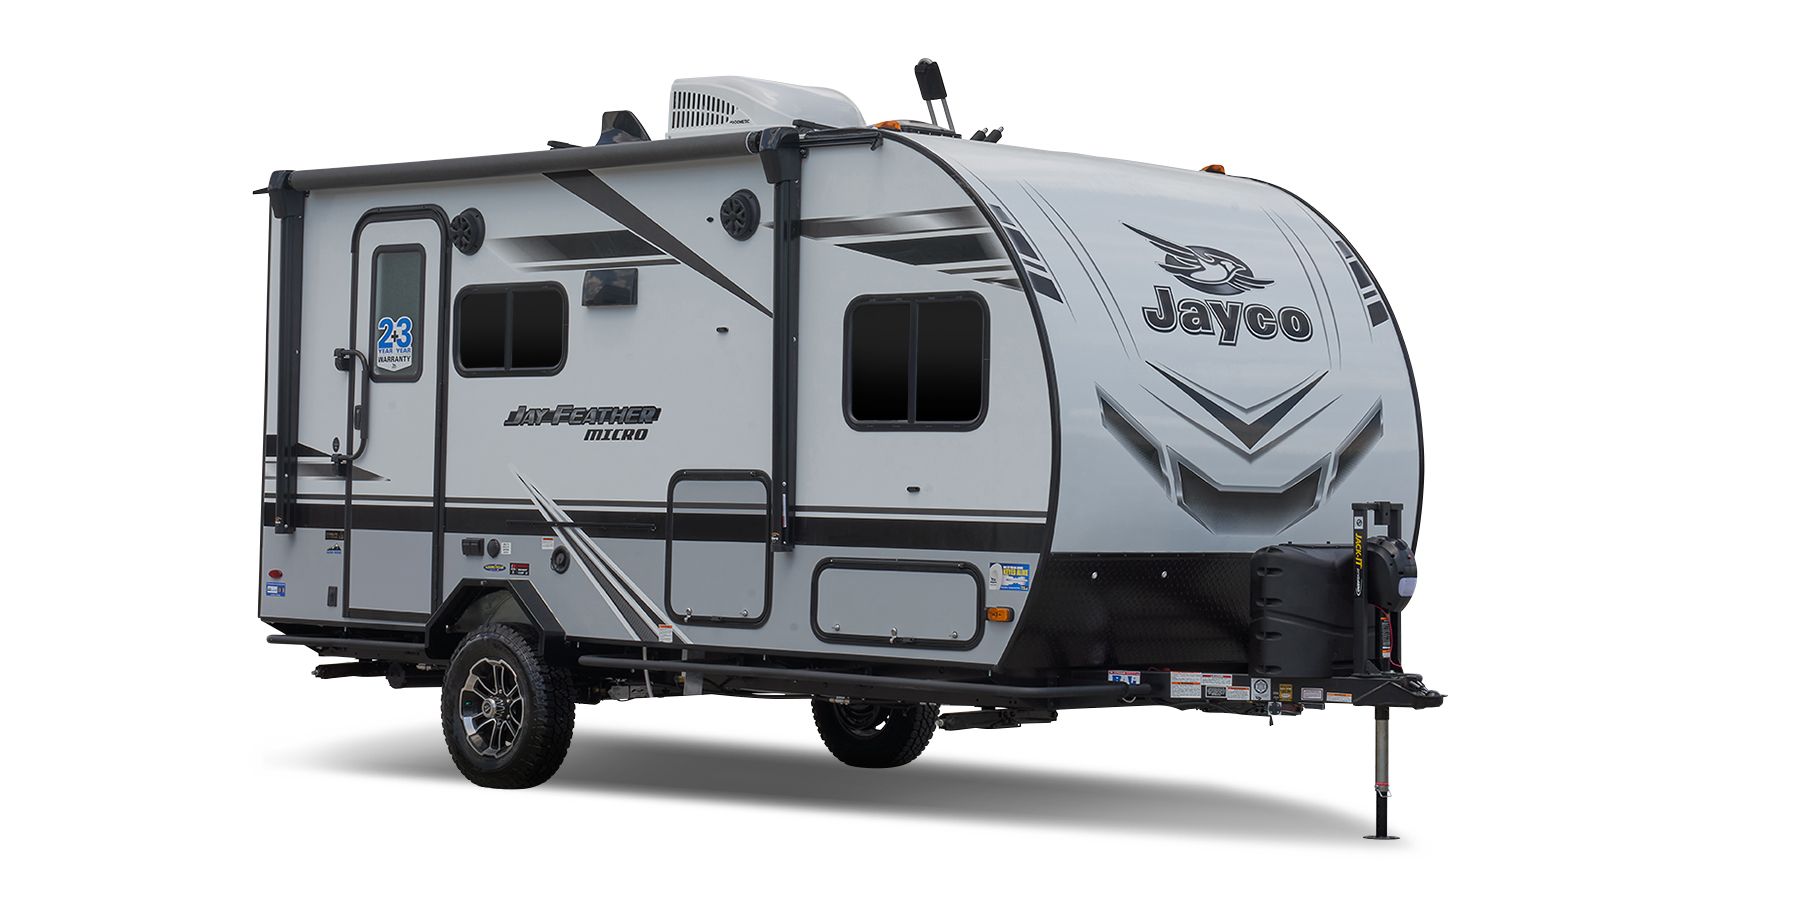 jay feather travel trailer